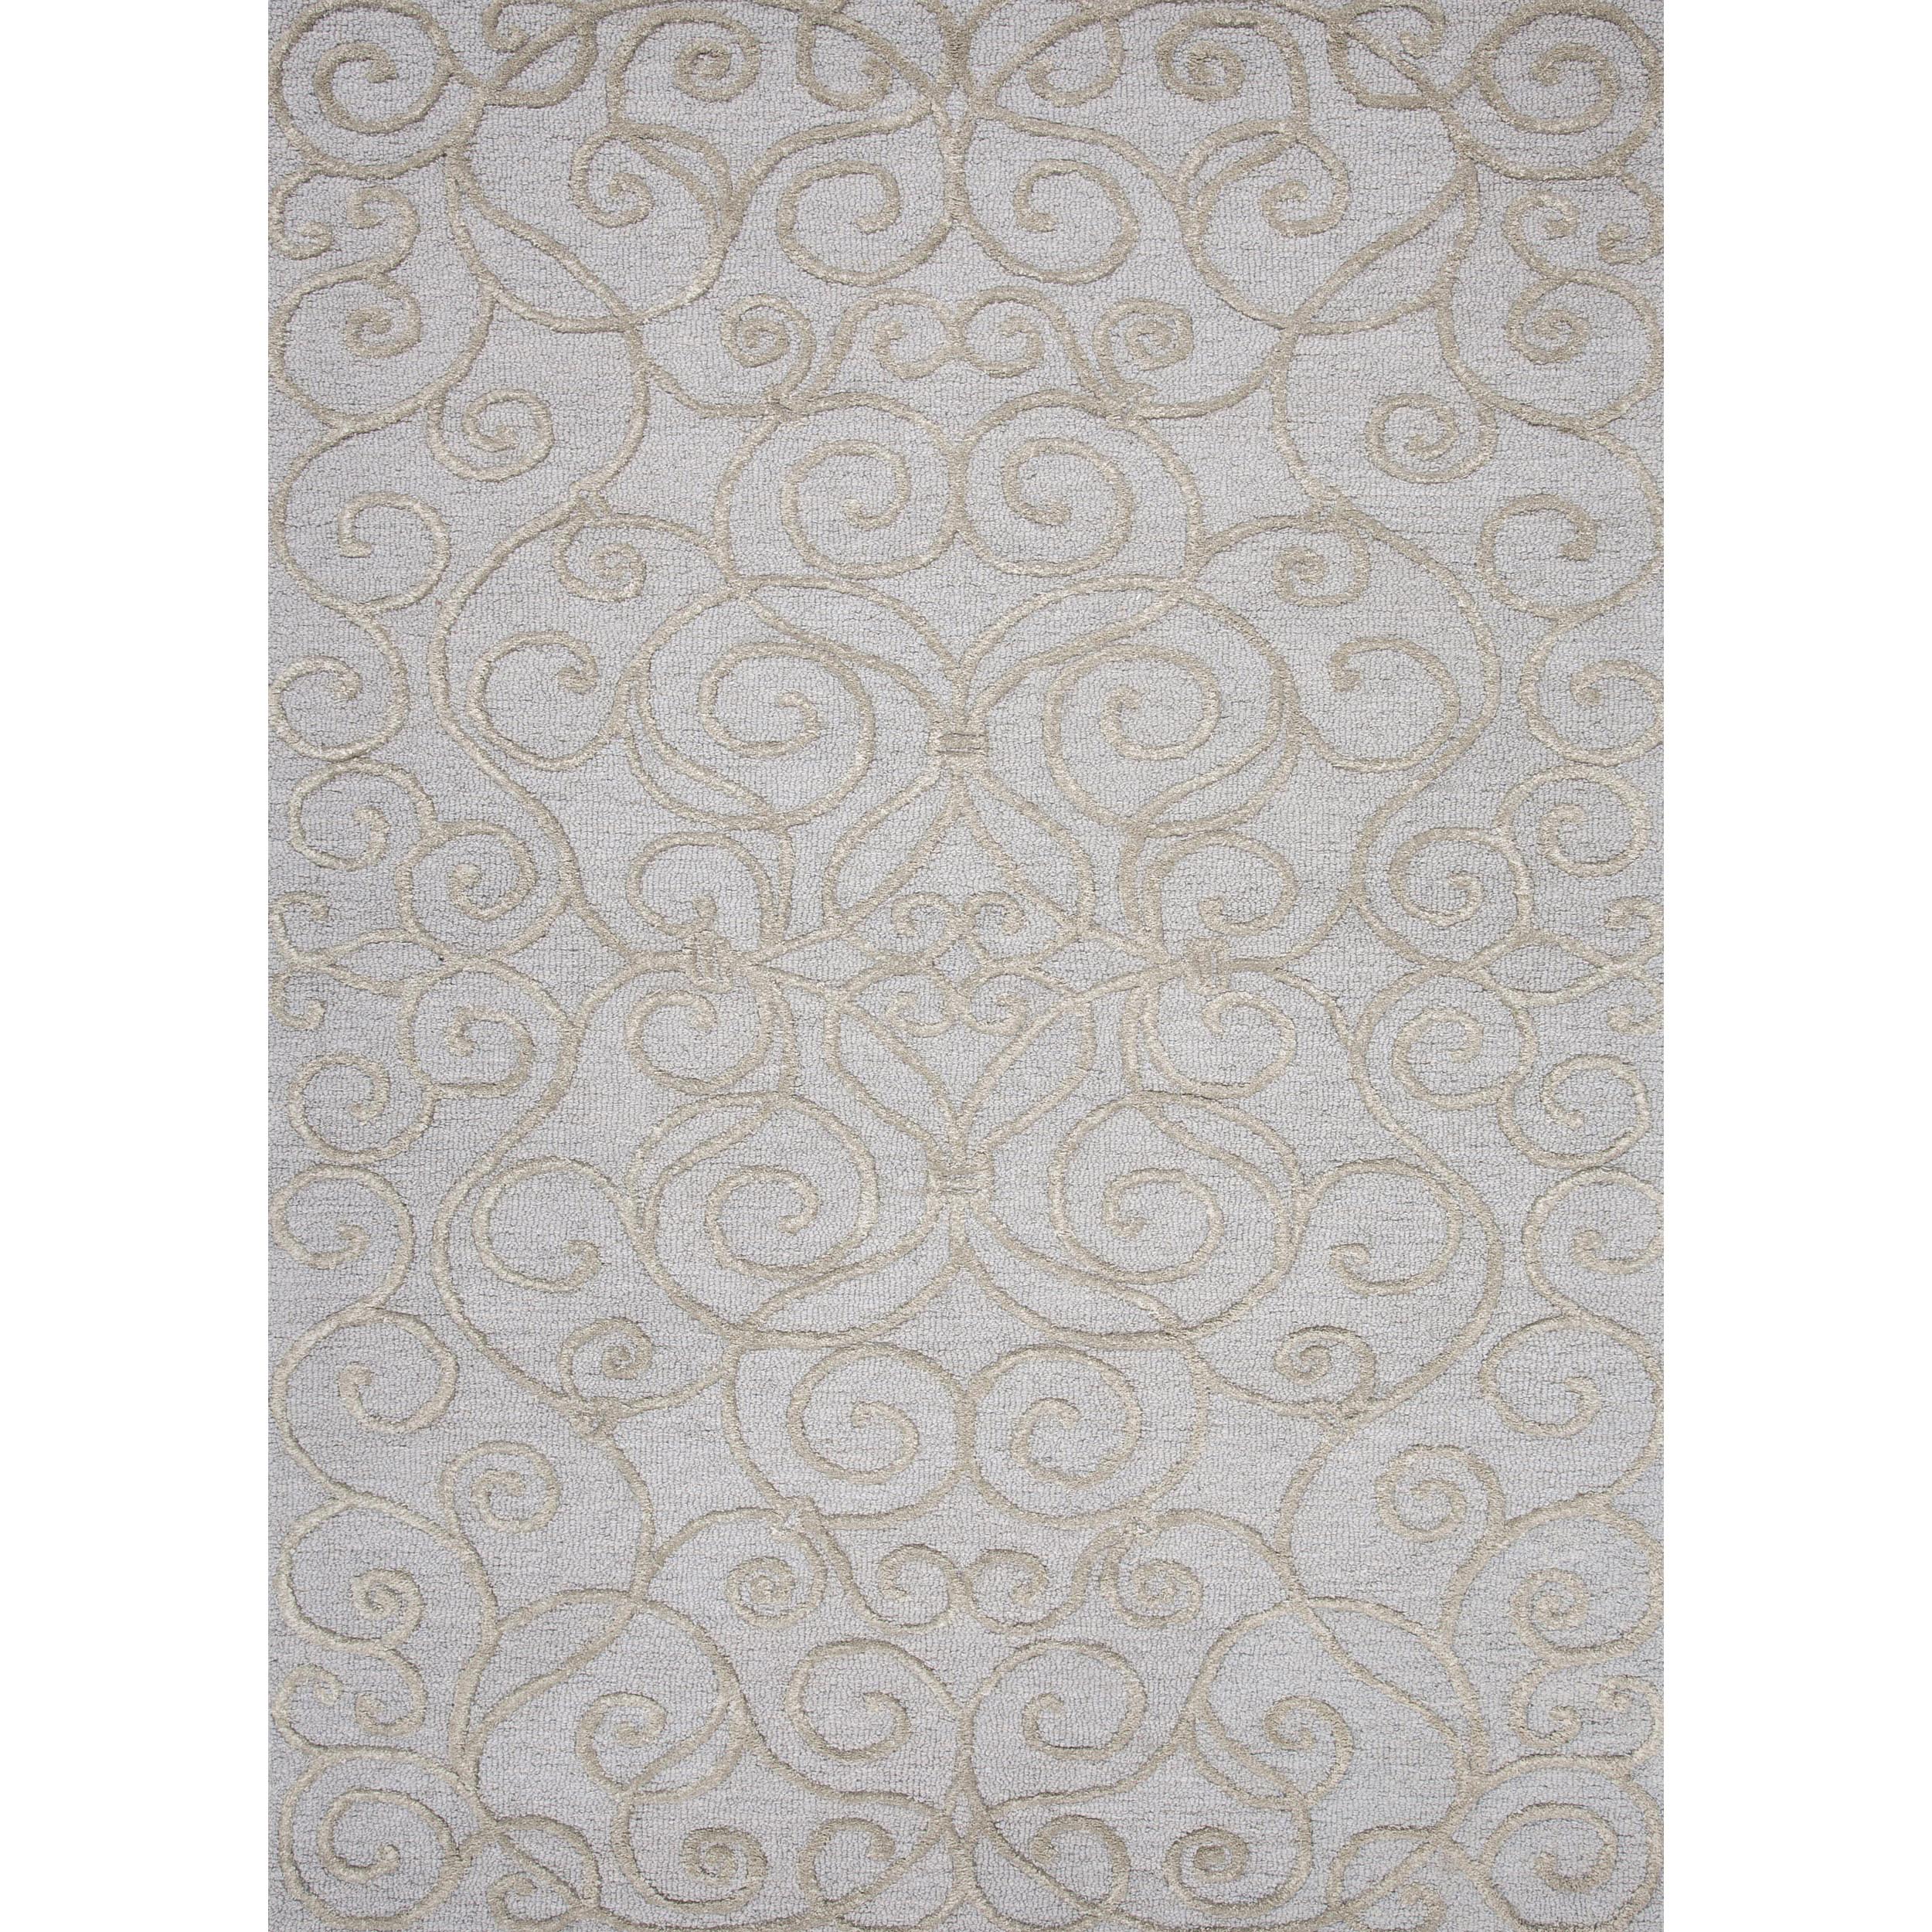 Transitional Floral Blue Wool/silk Tufted Area Rug (5 X 8)